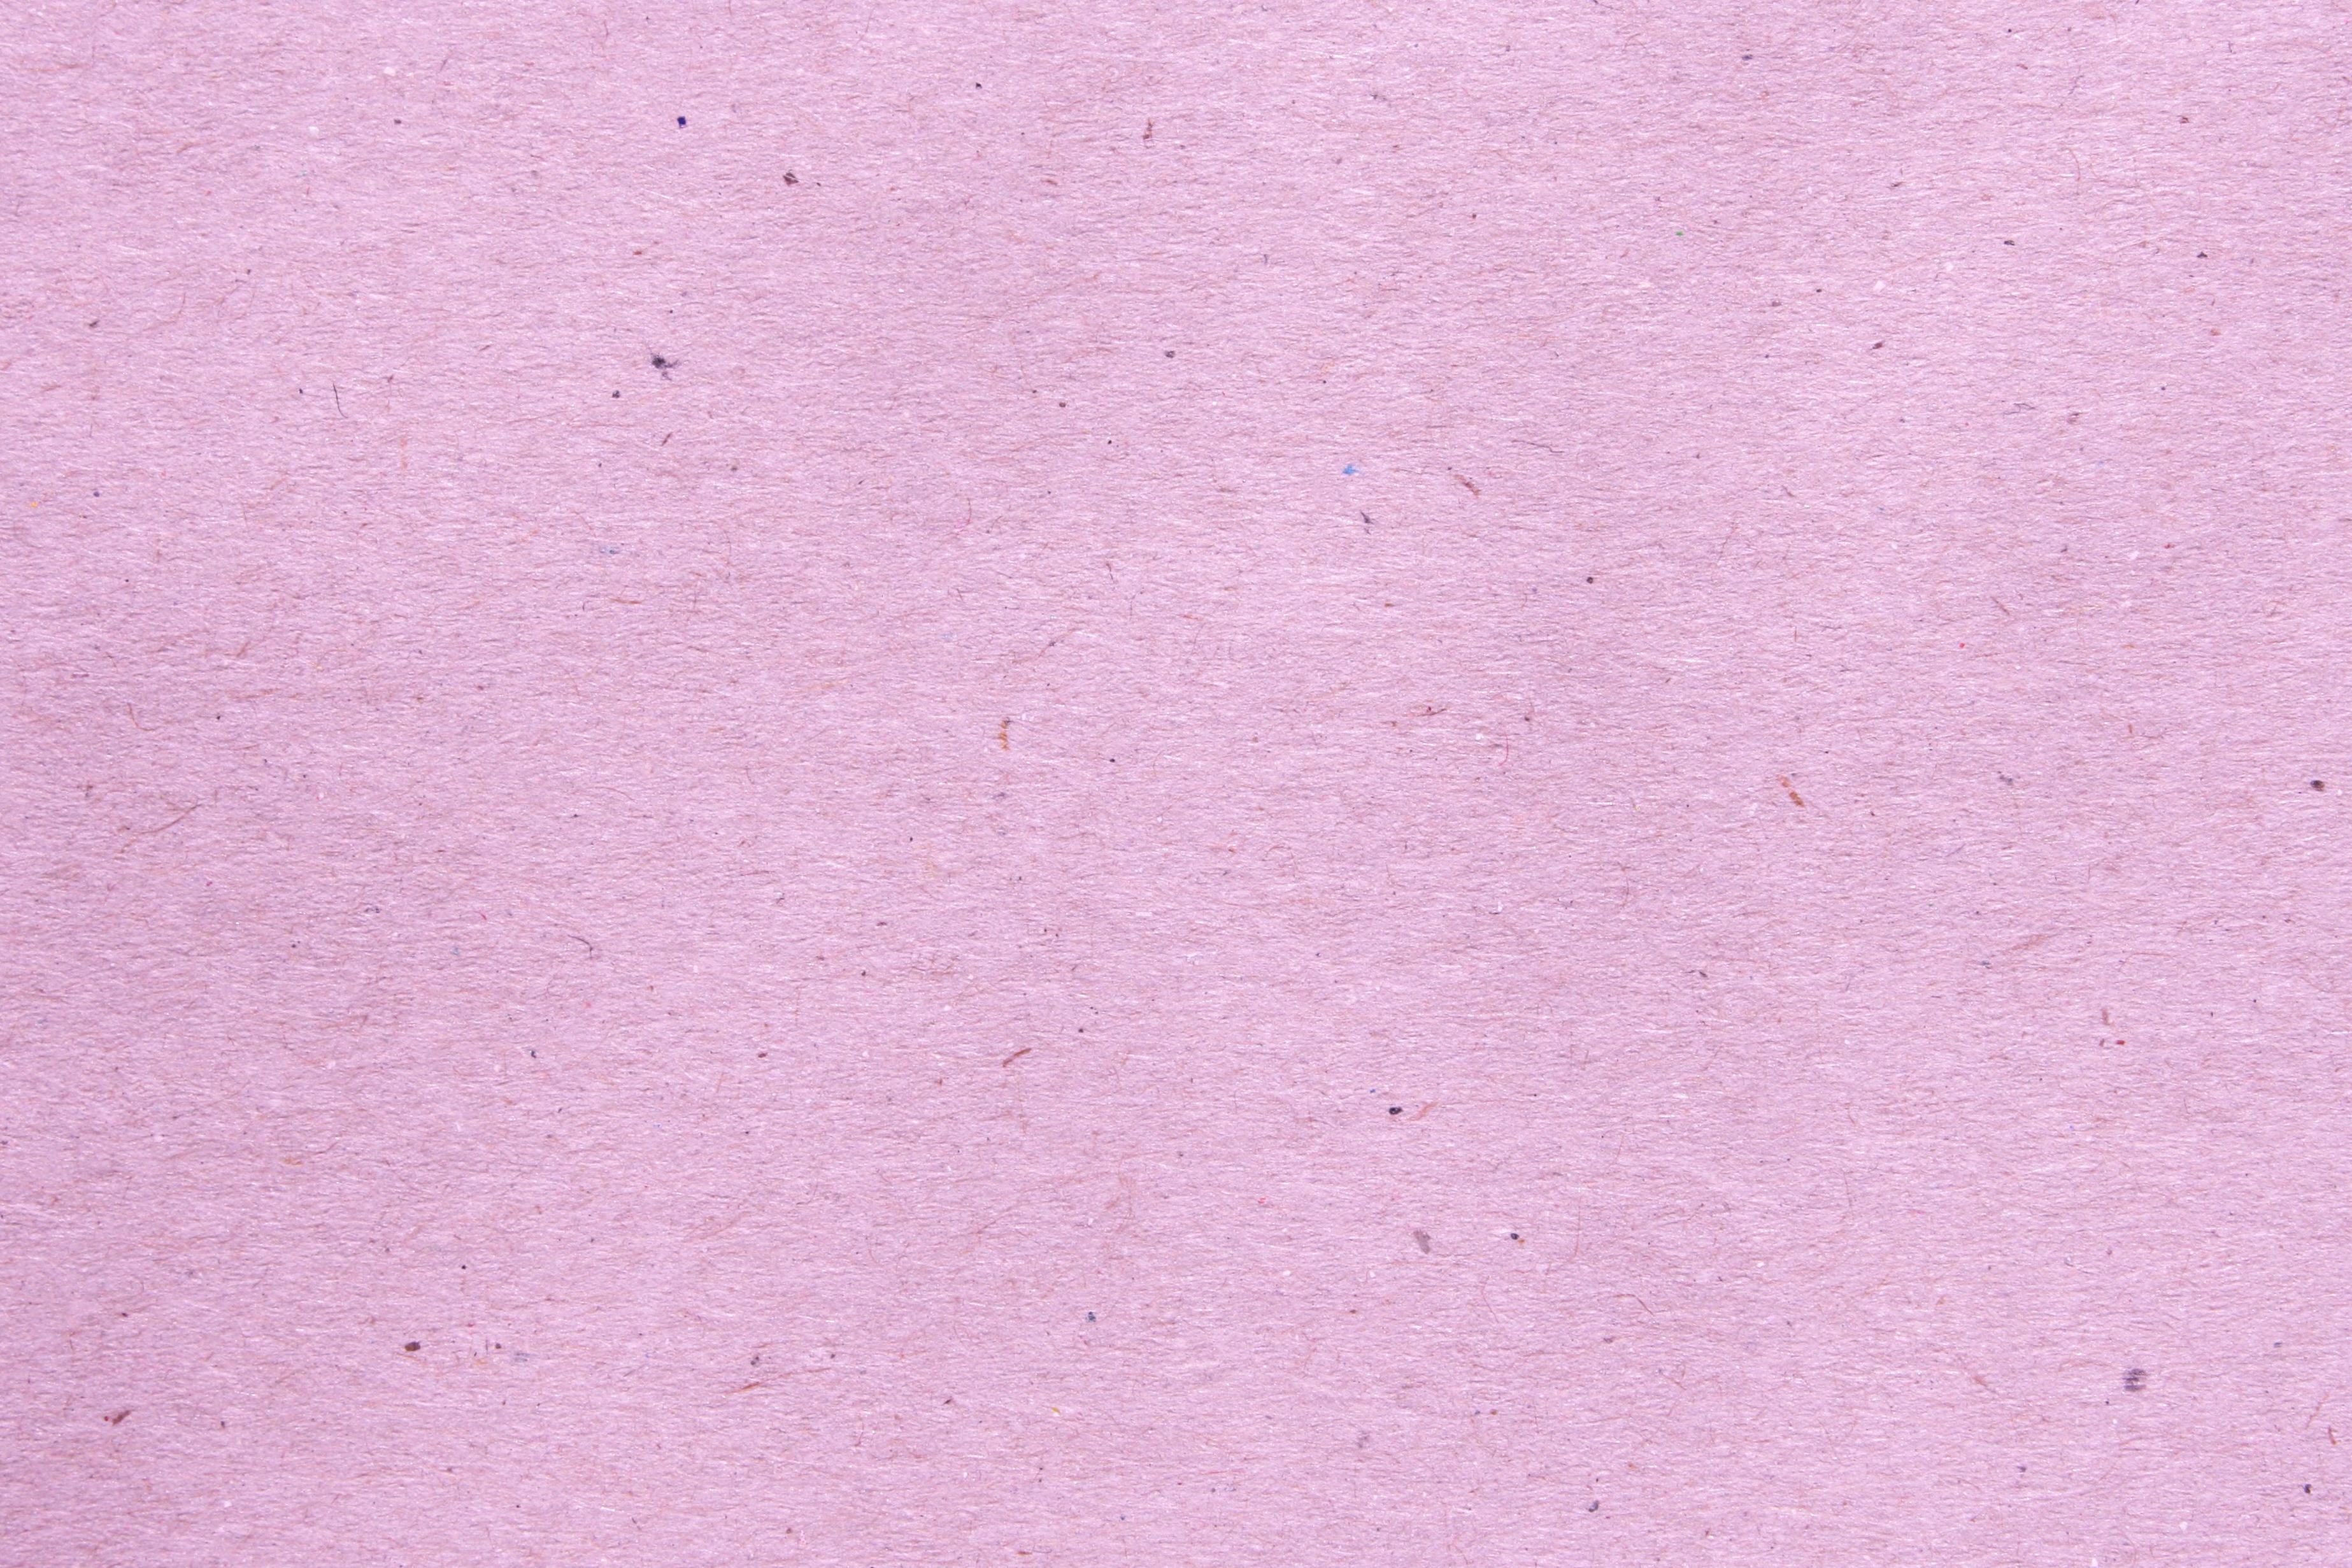 Free picture: pink colored paper, texture, flecks